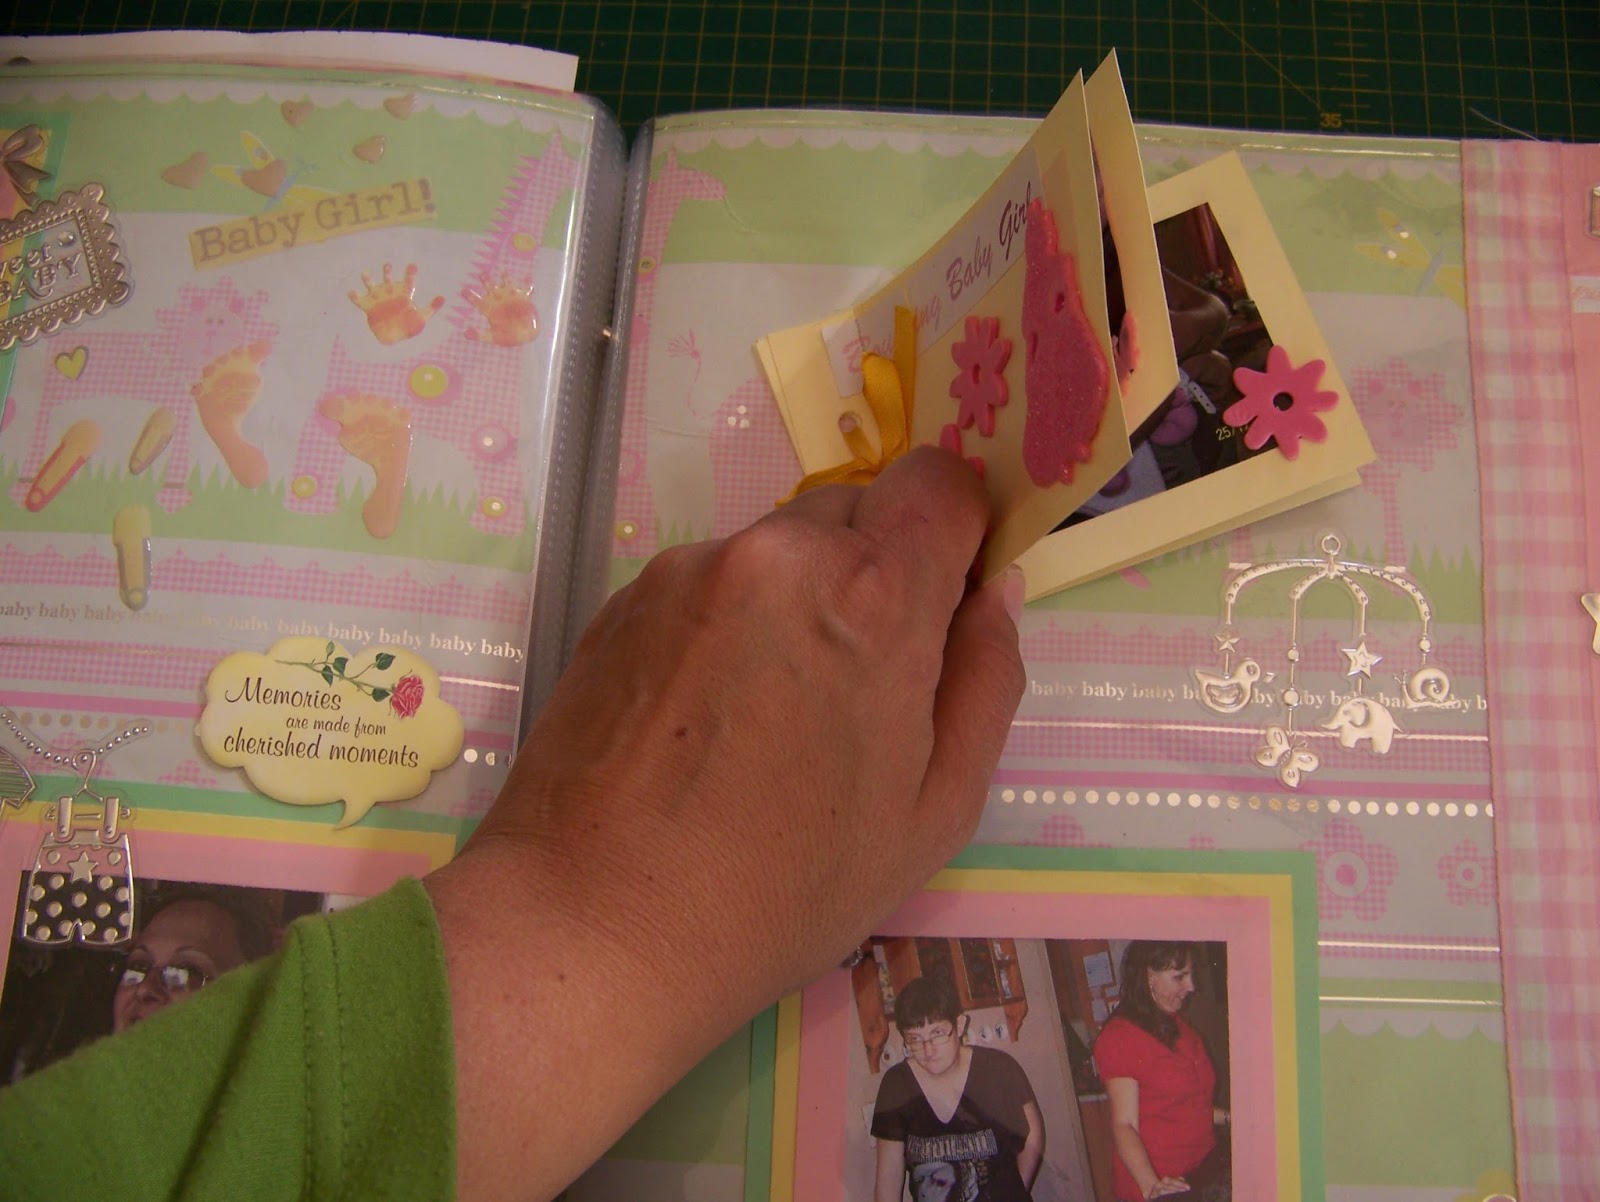 A Pretty Talent Blog: Scrapbooking: Adding a mini album to a page layout